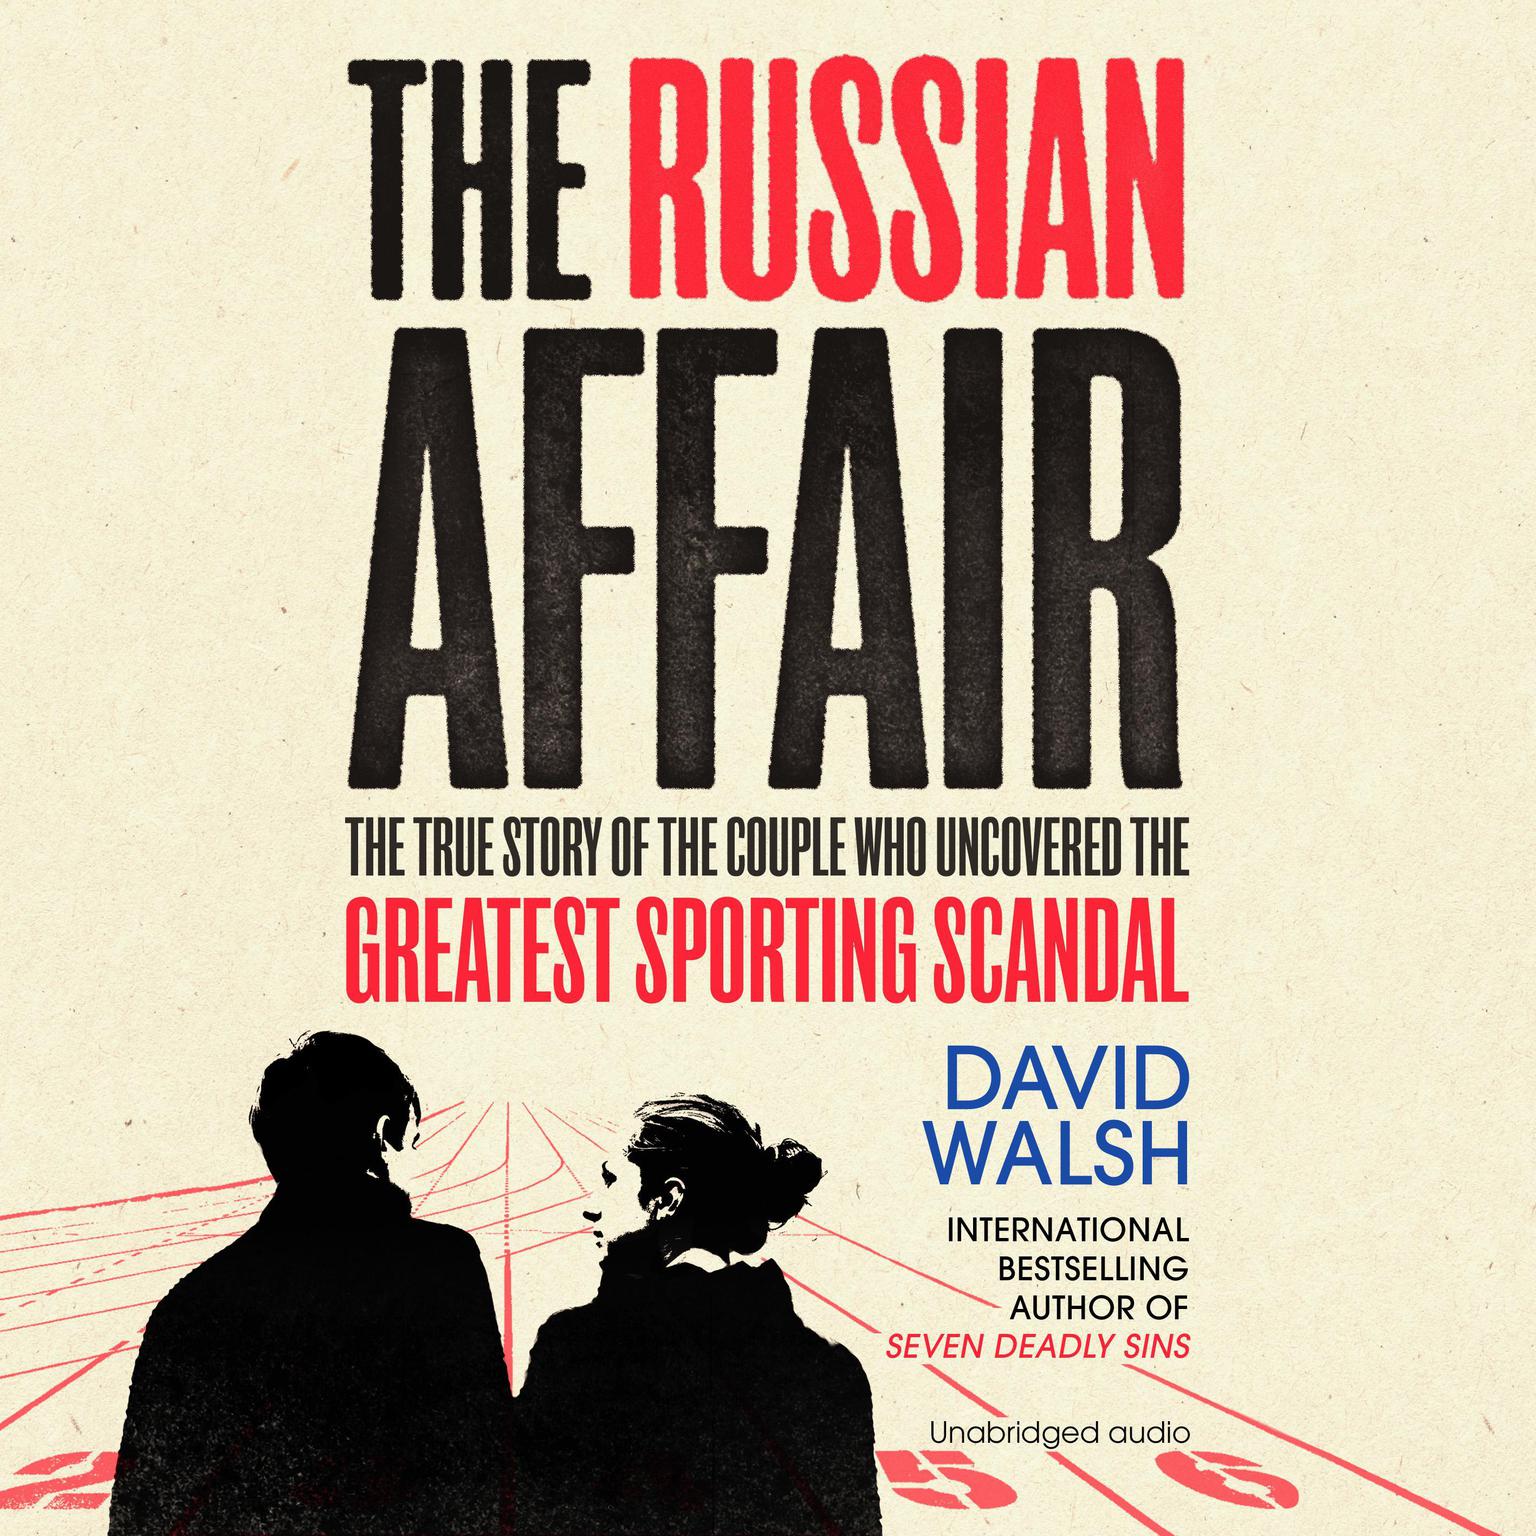 The Russian Affair: The True Story of the Couple who Uncovered the Greatest Sporting Scandal Audiobook, by David Walsh